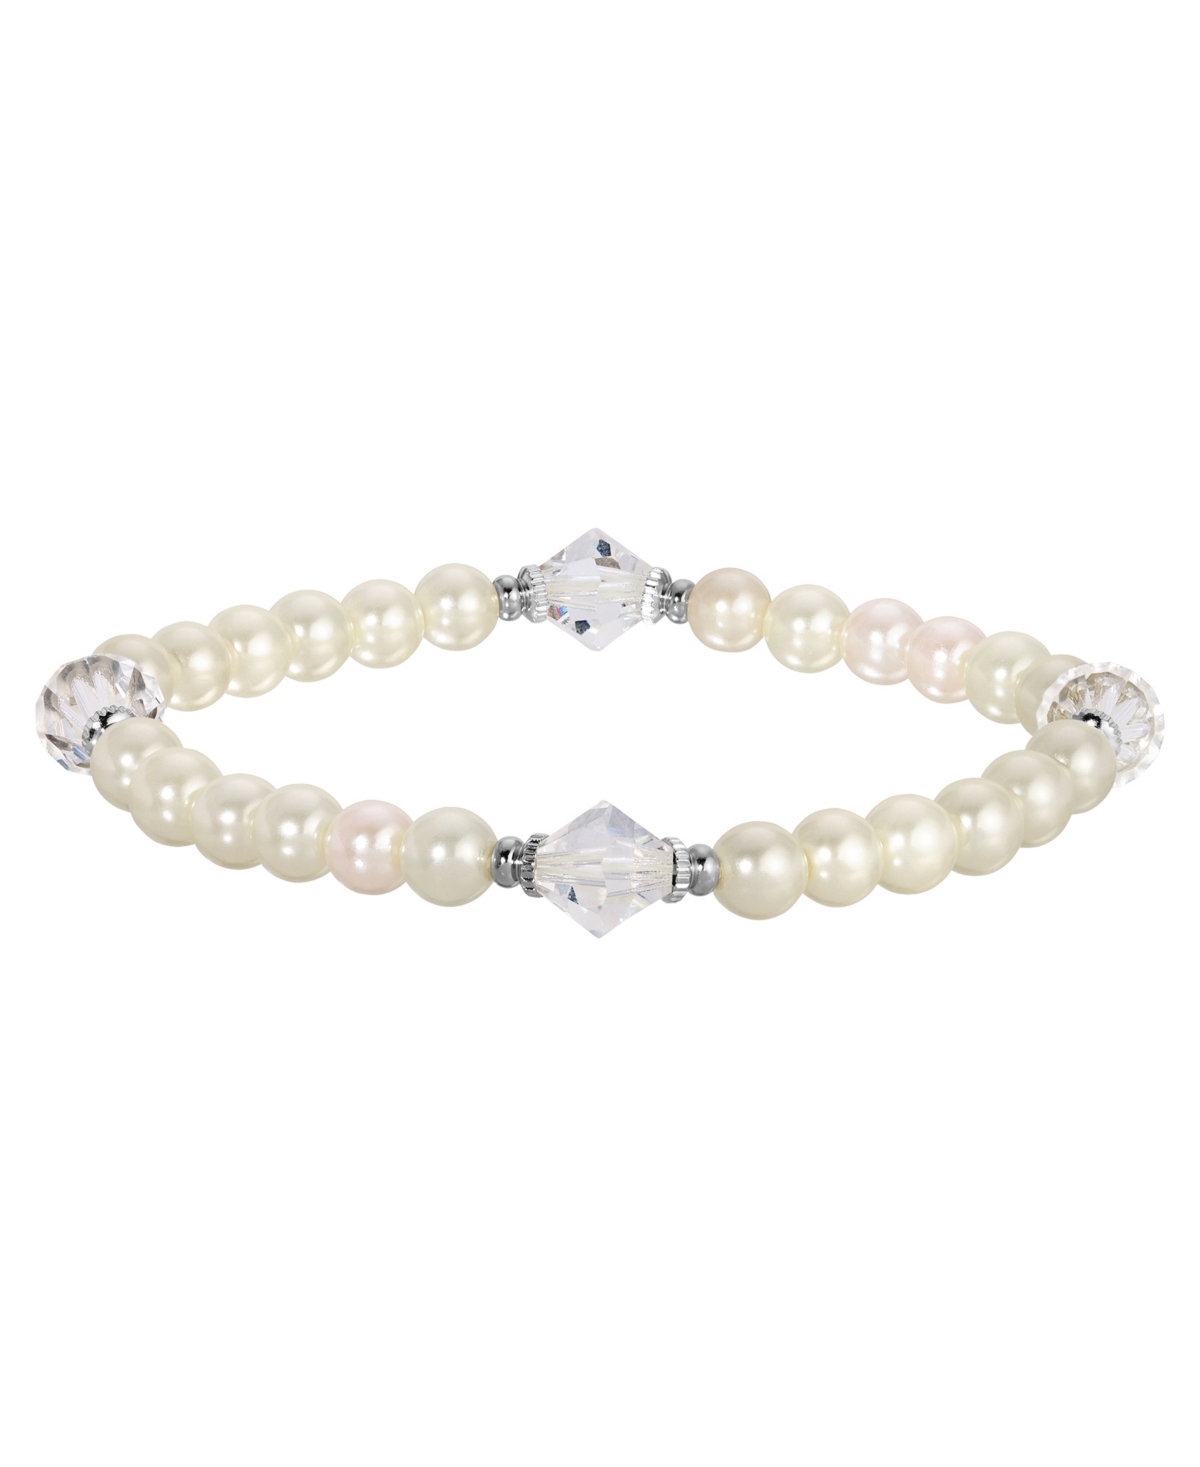 2028 Silver-tone Imitation Pearl And Lantern Bead Stretch Bracelet In White